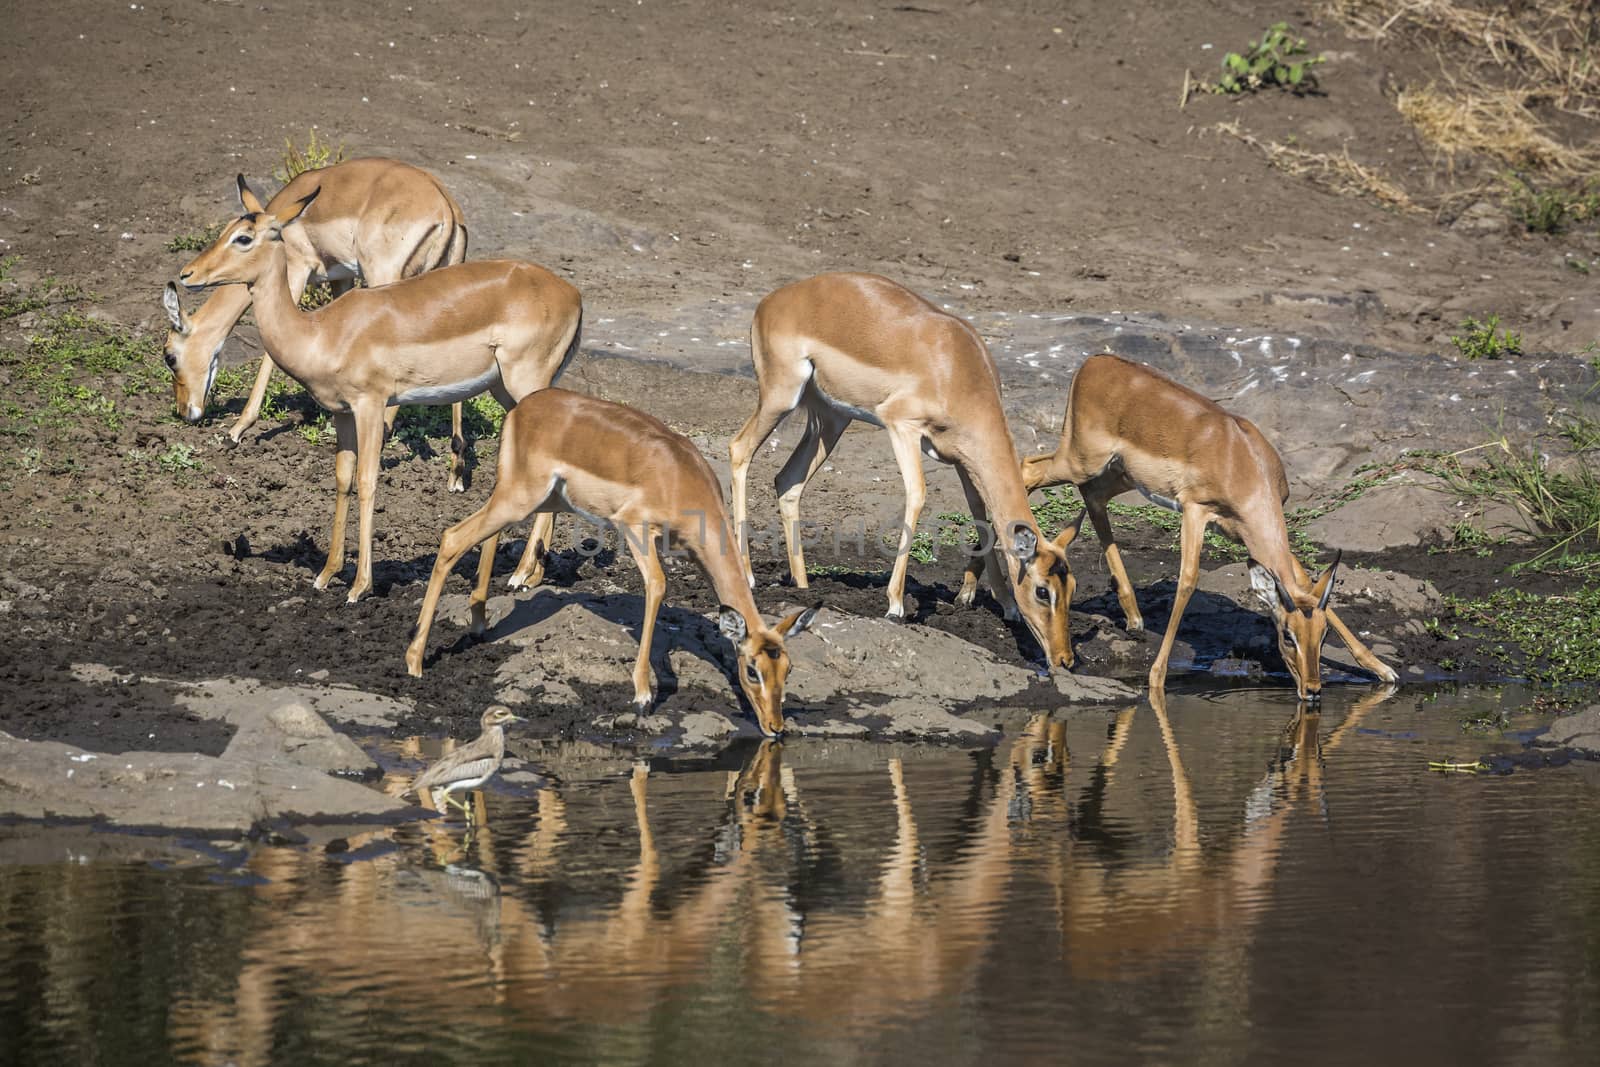 Small group of Common Impalas drinking in waterhole with reflection in Kruger National park, South Africa ; Specie Aepyceros melampus family of Bovidae